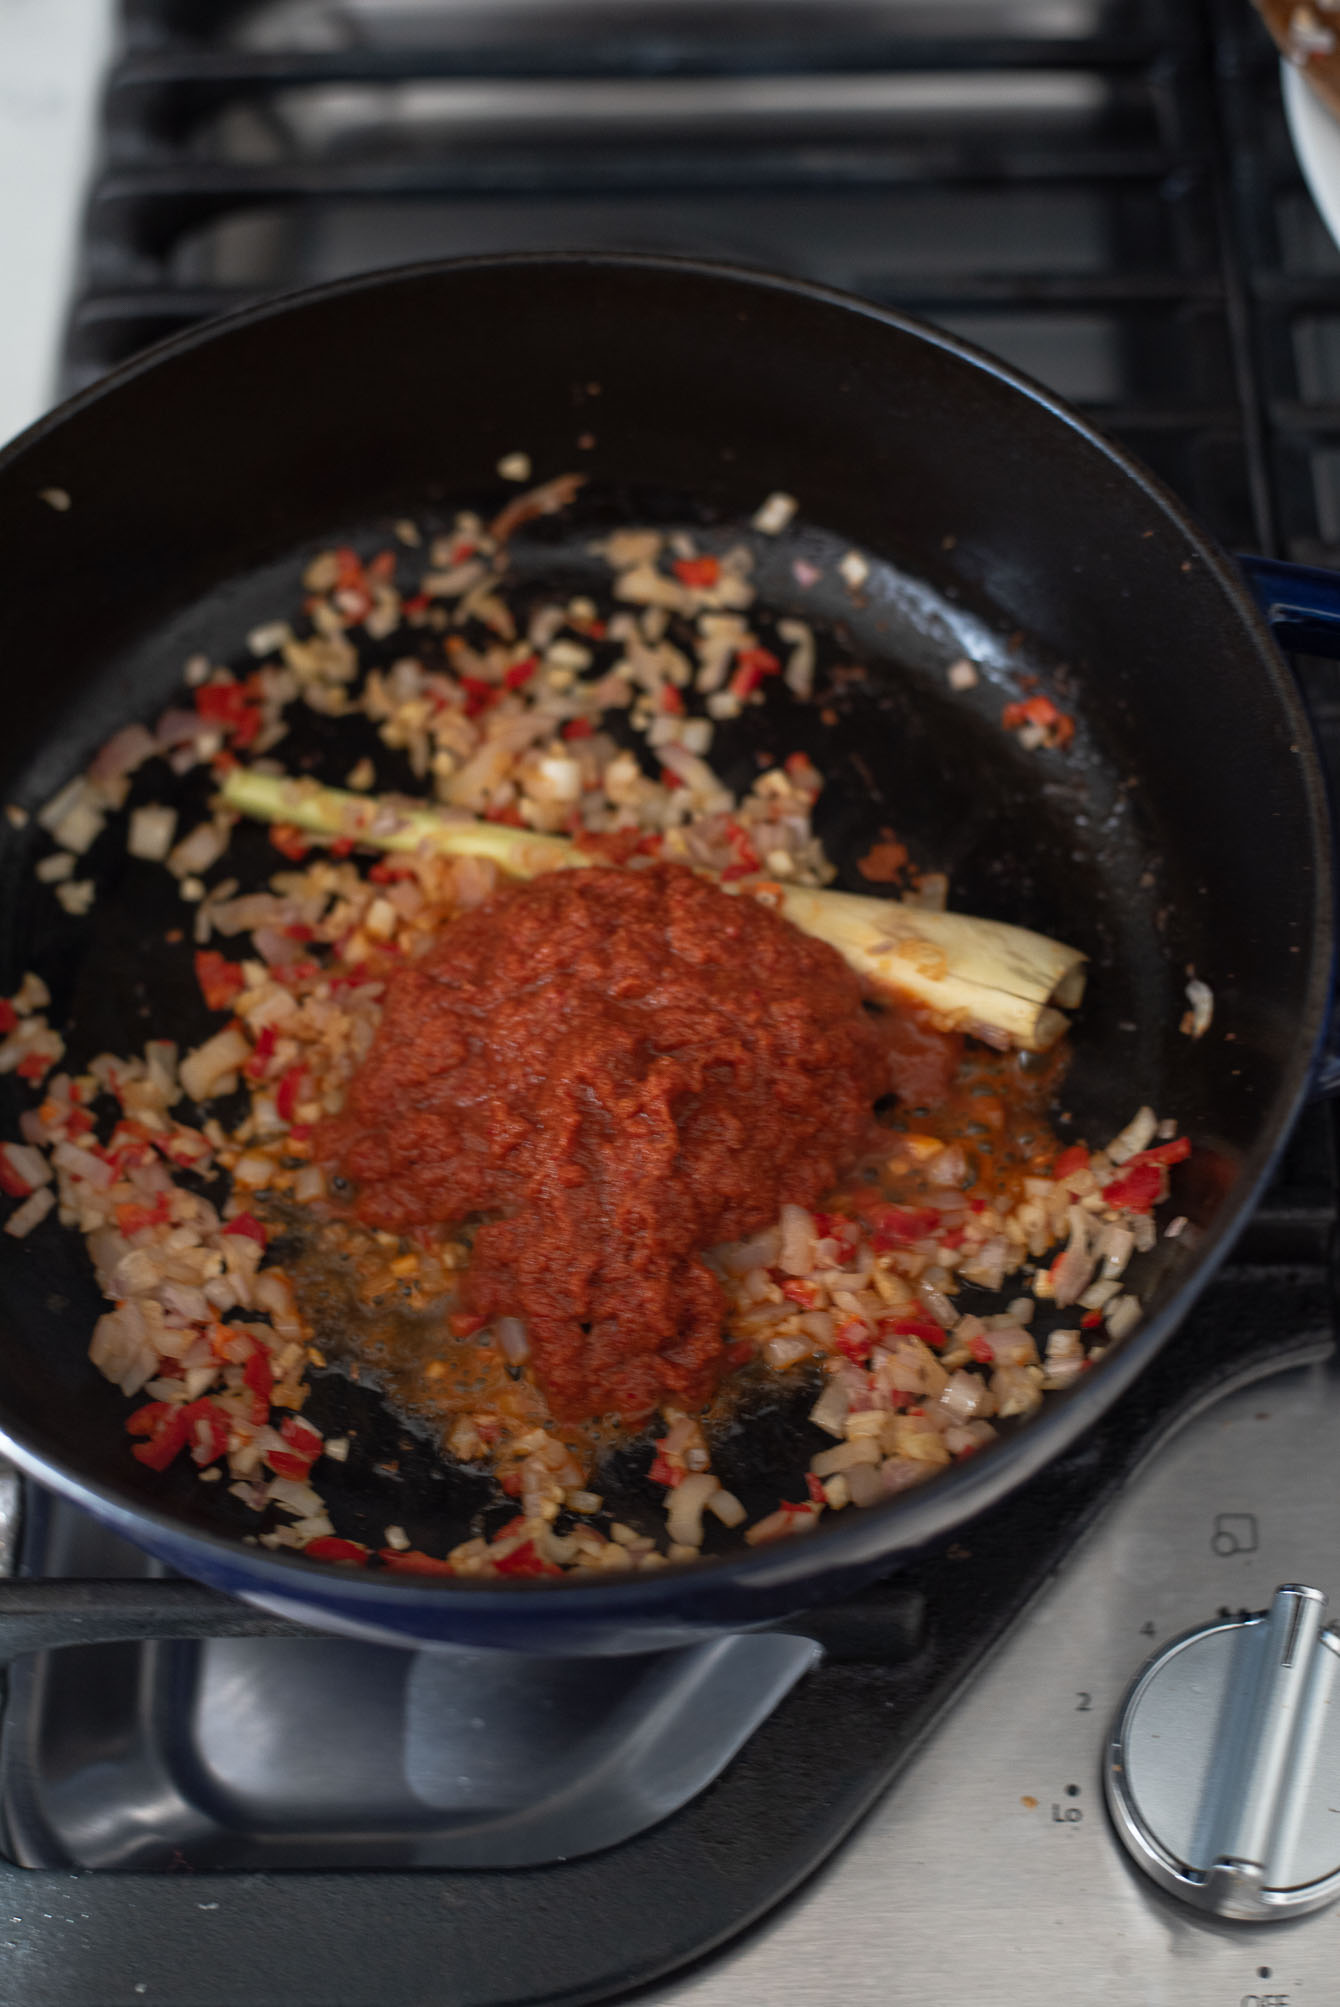 Thai red curry paste added to savory ingredients in a pot.